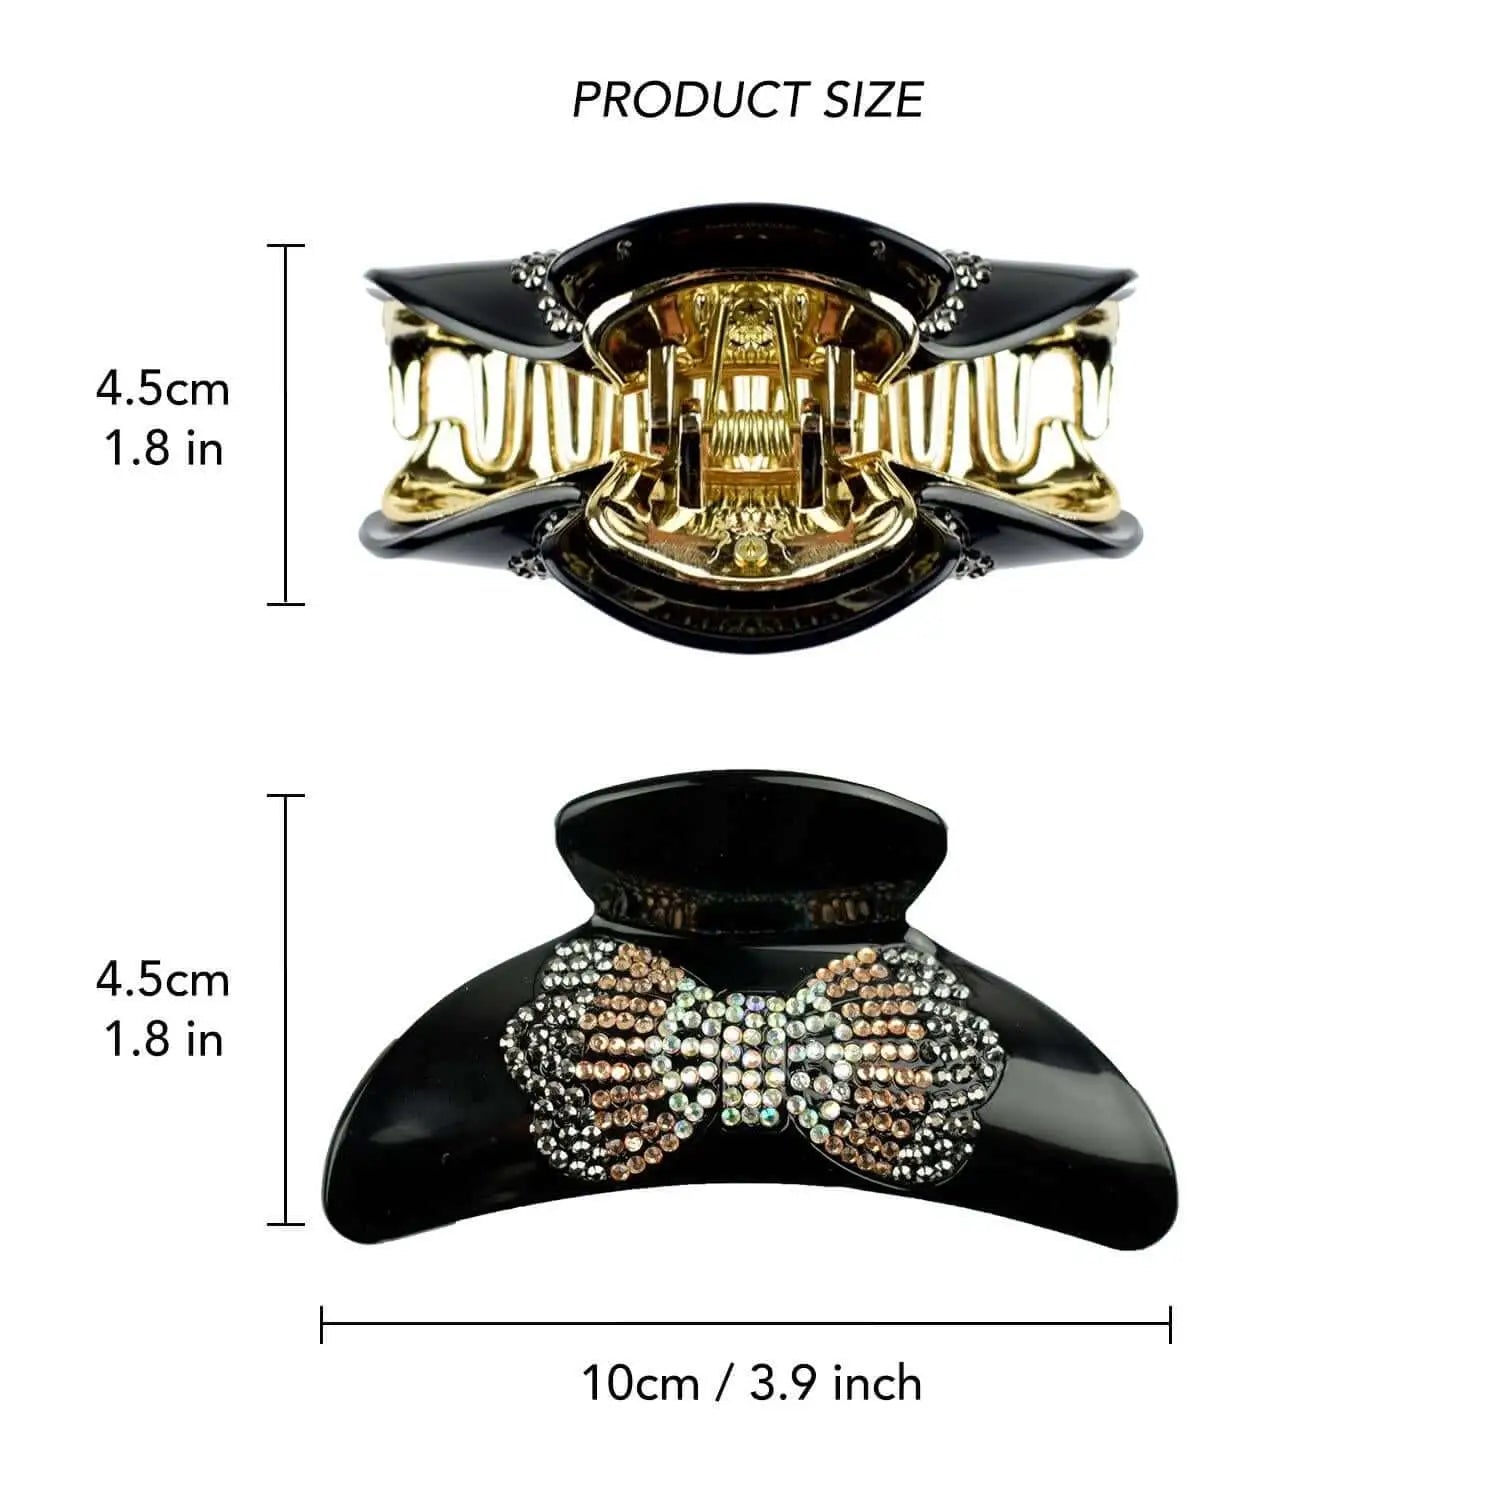 Black and gold rhinestone butterfly ring with bow - Glamorous Rhinestone Butterfly Hair Clamps